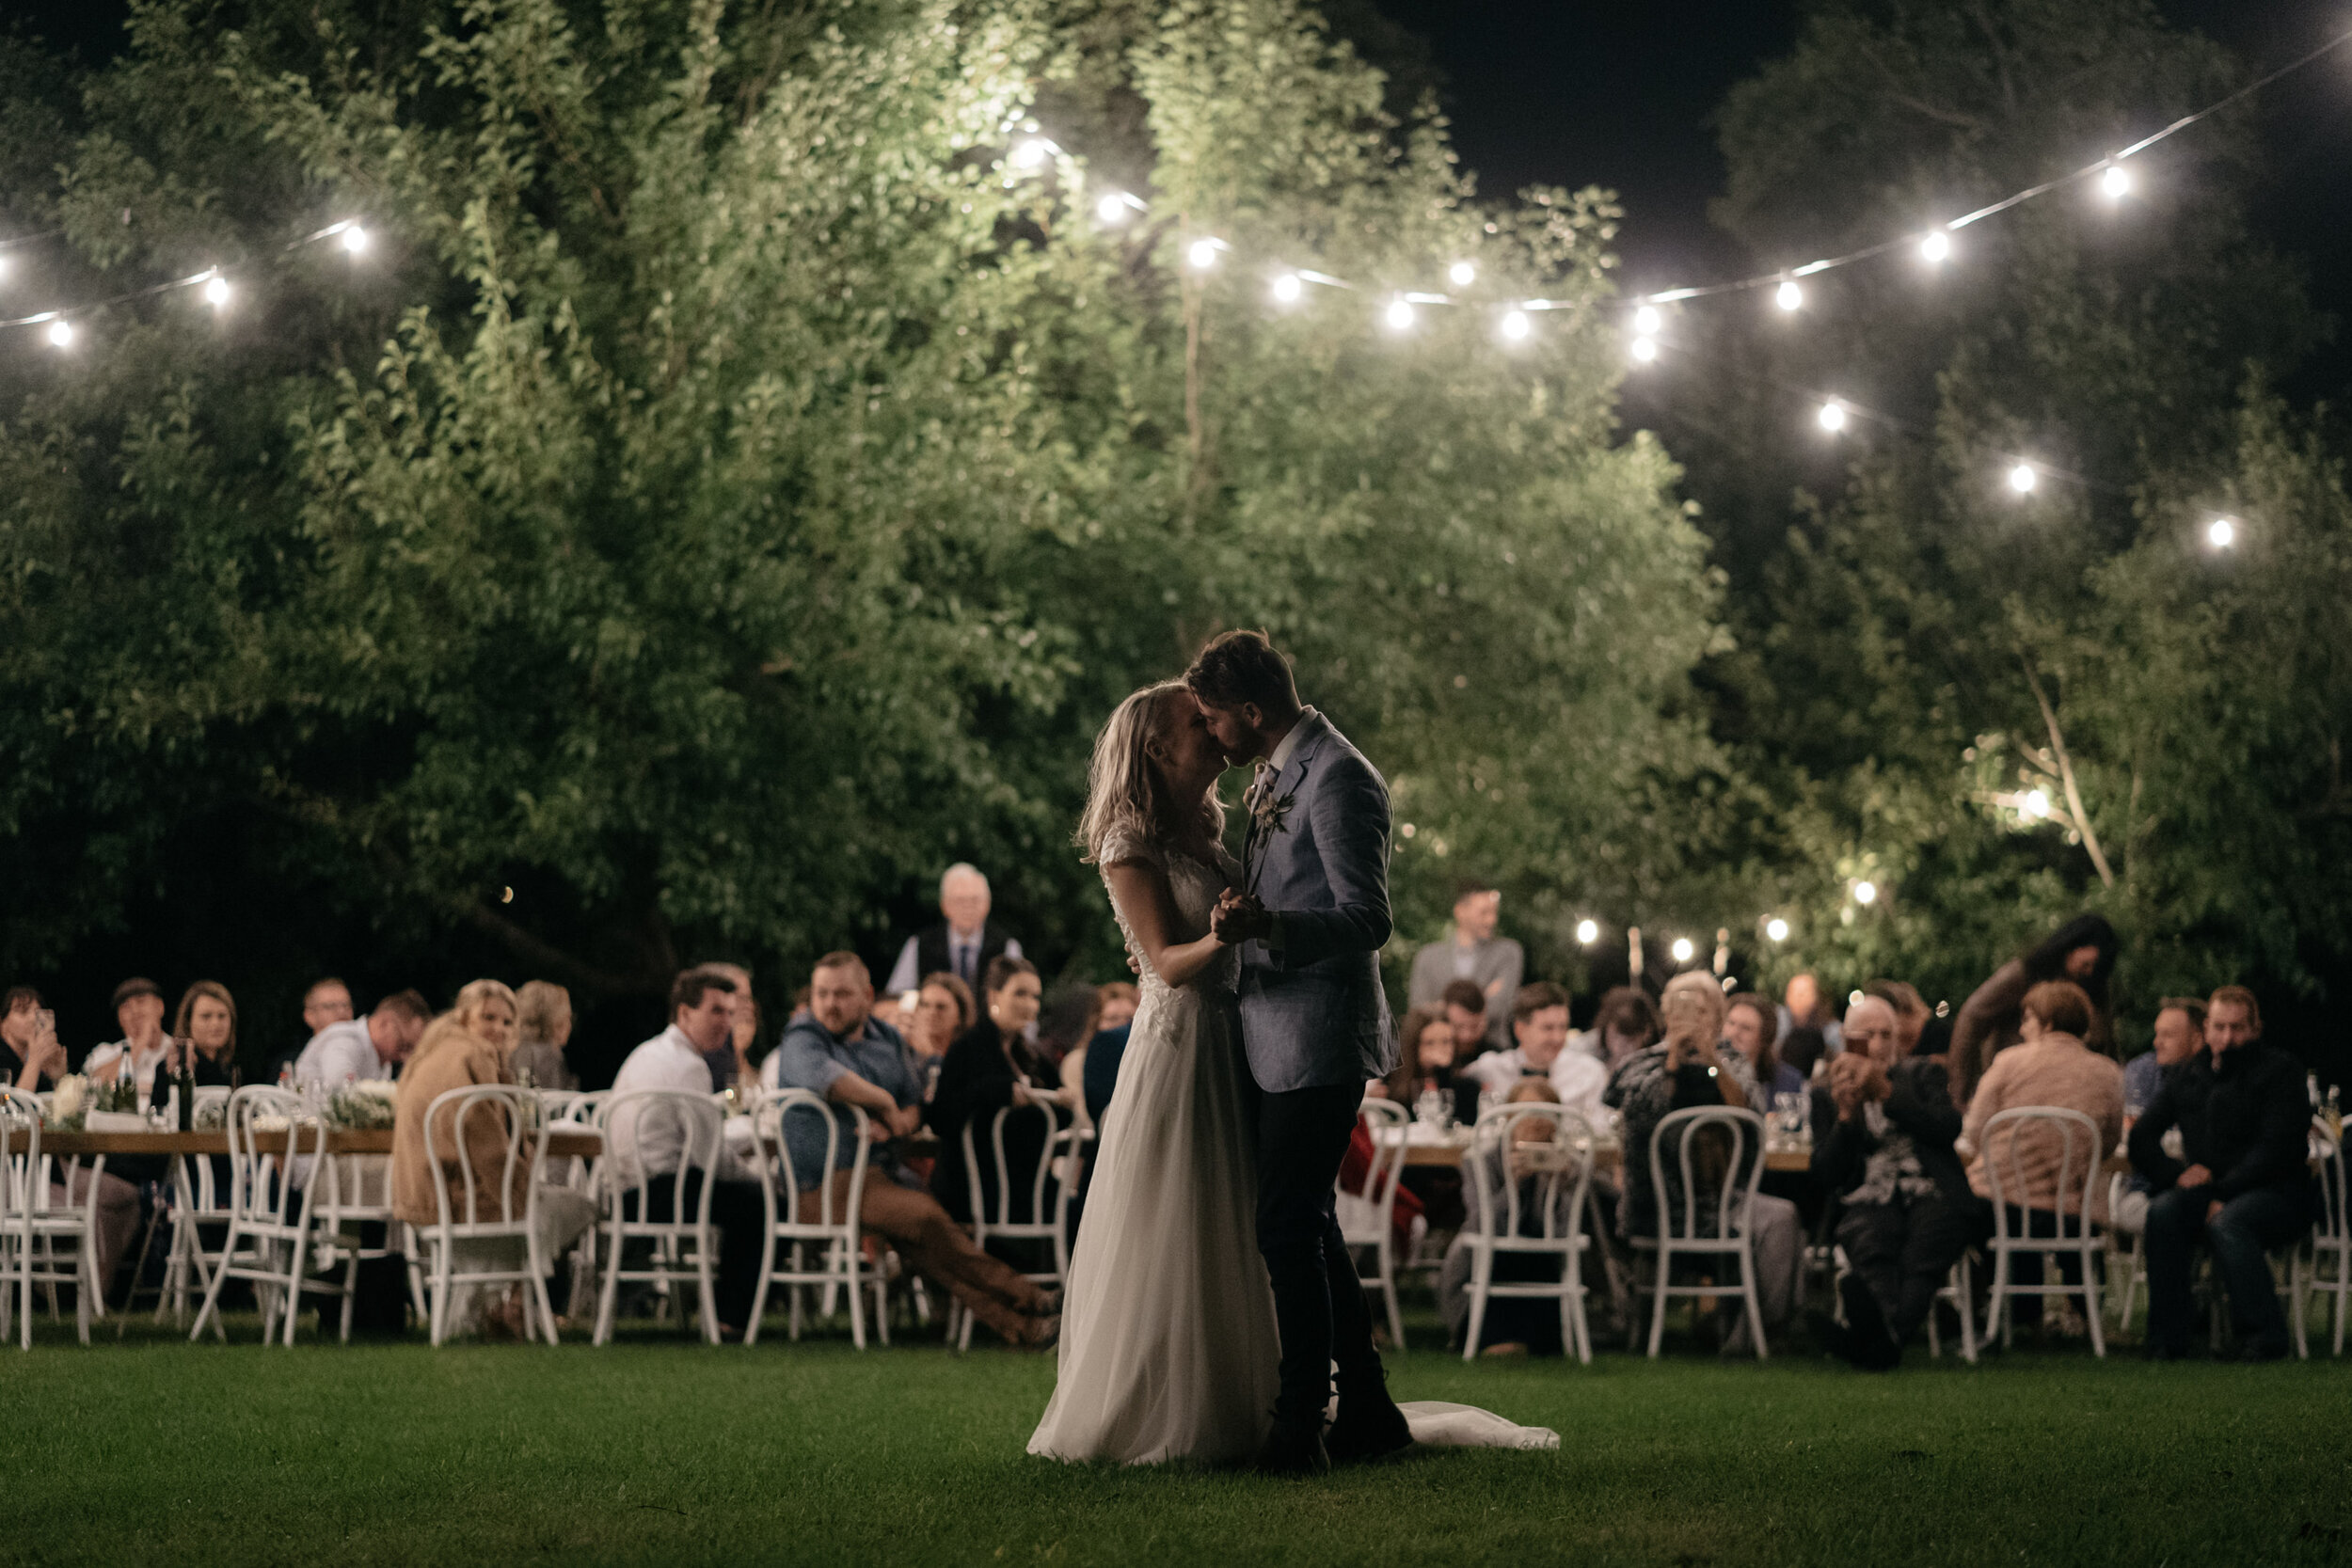 Tamborine Mountain outdoor wedding - first dance - Trent and Jessie photography and videography 